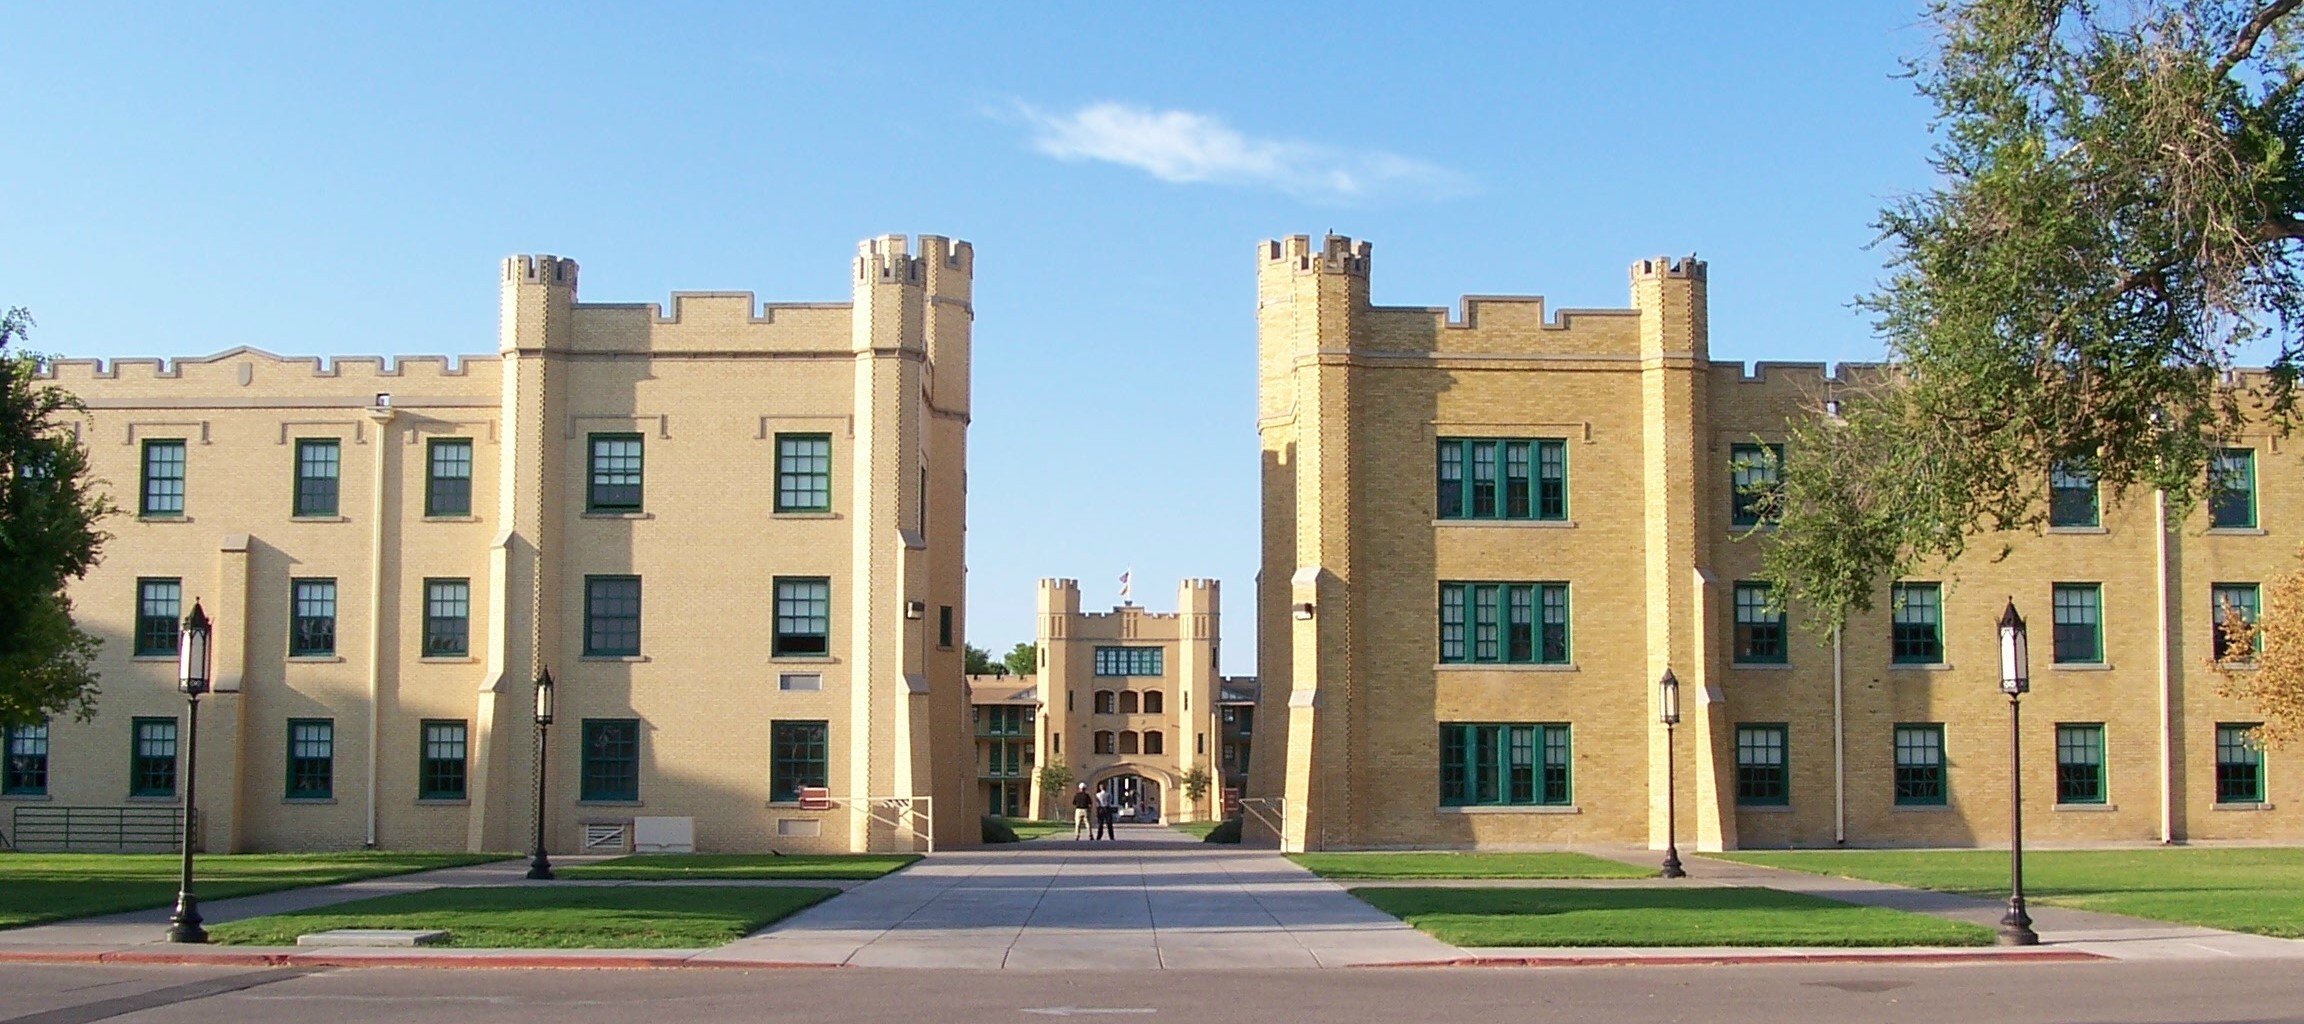 Orientation & What to Know - New Mexico Military Institute